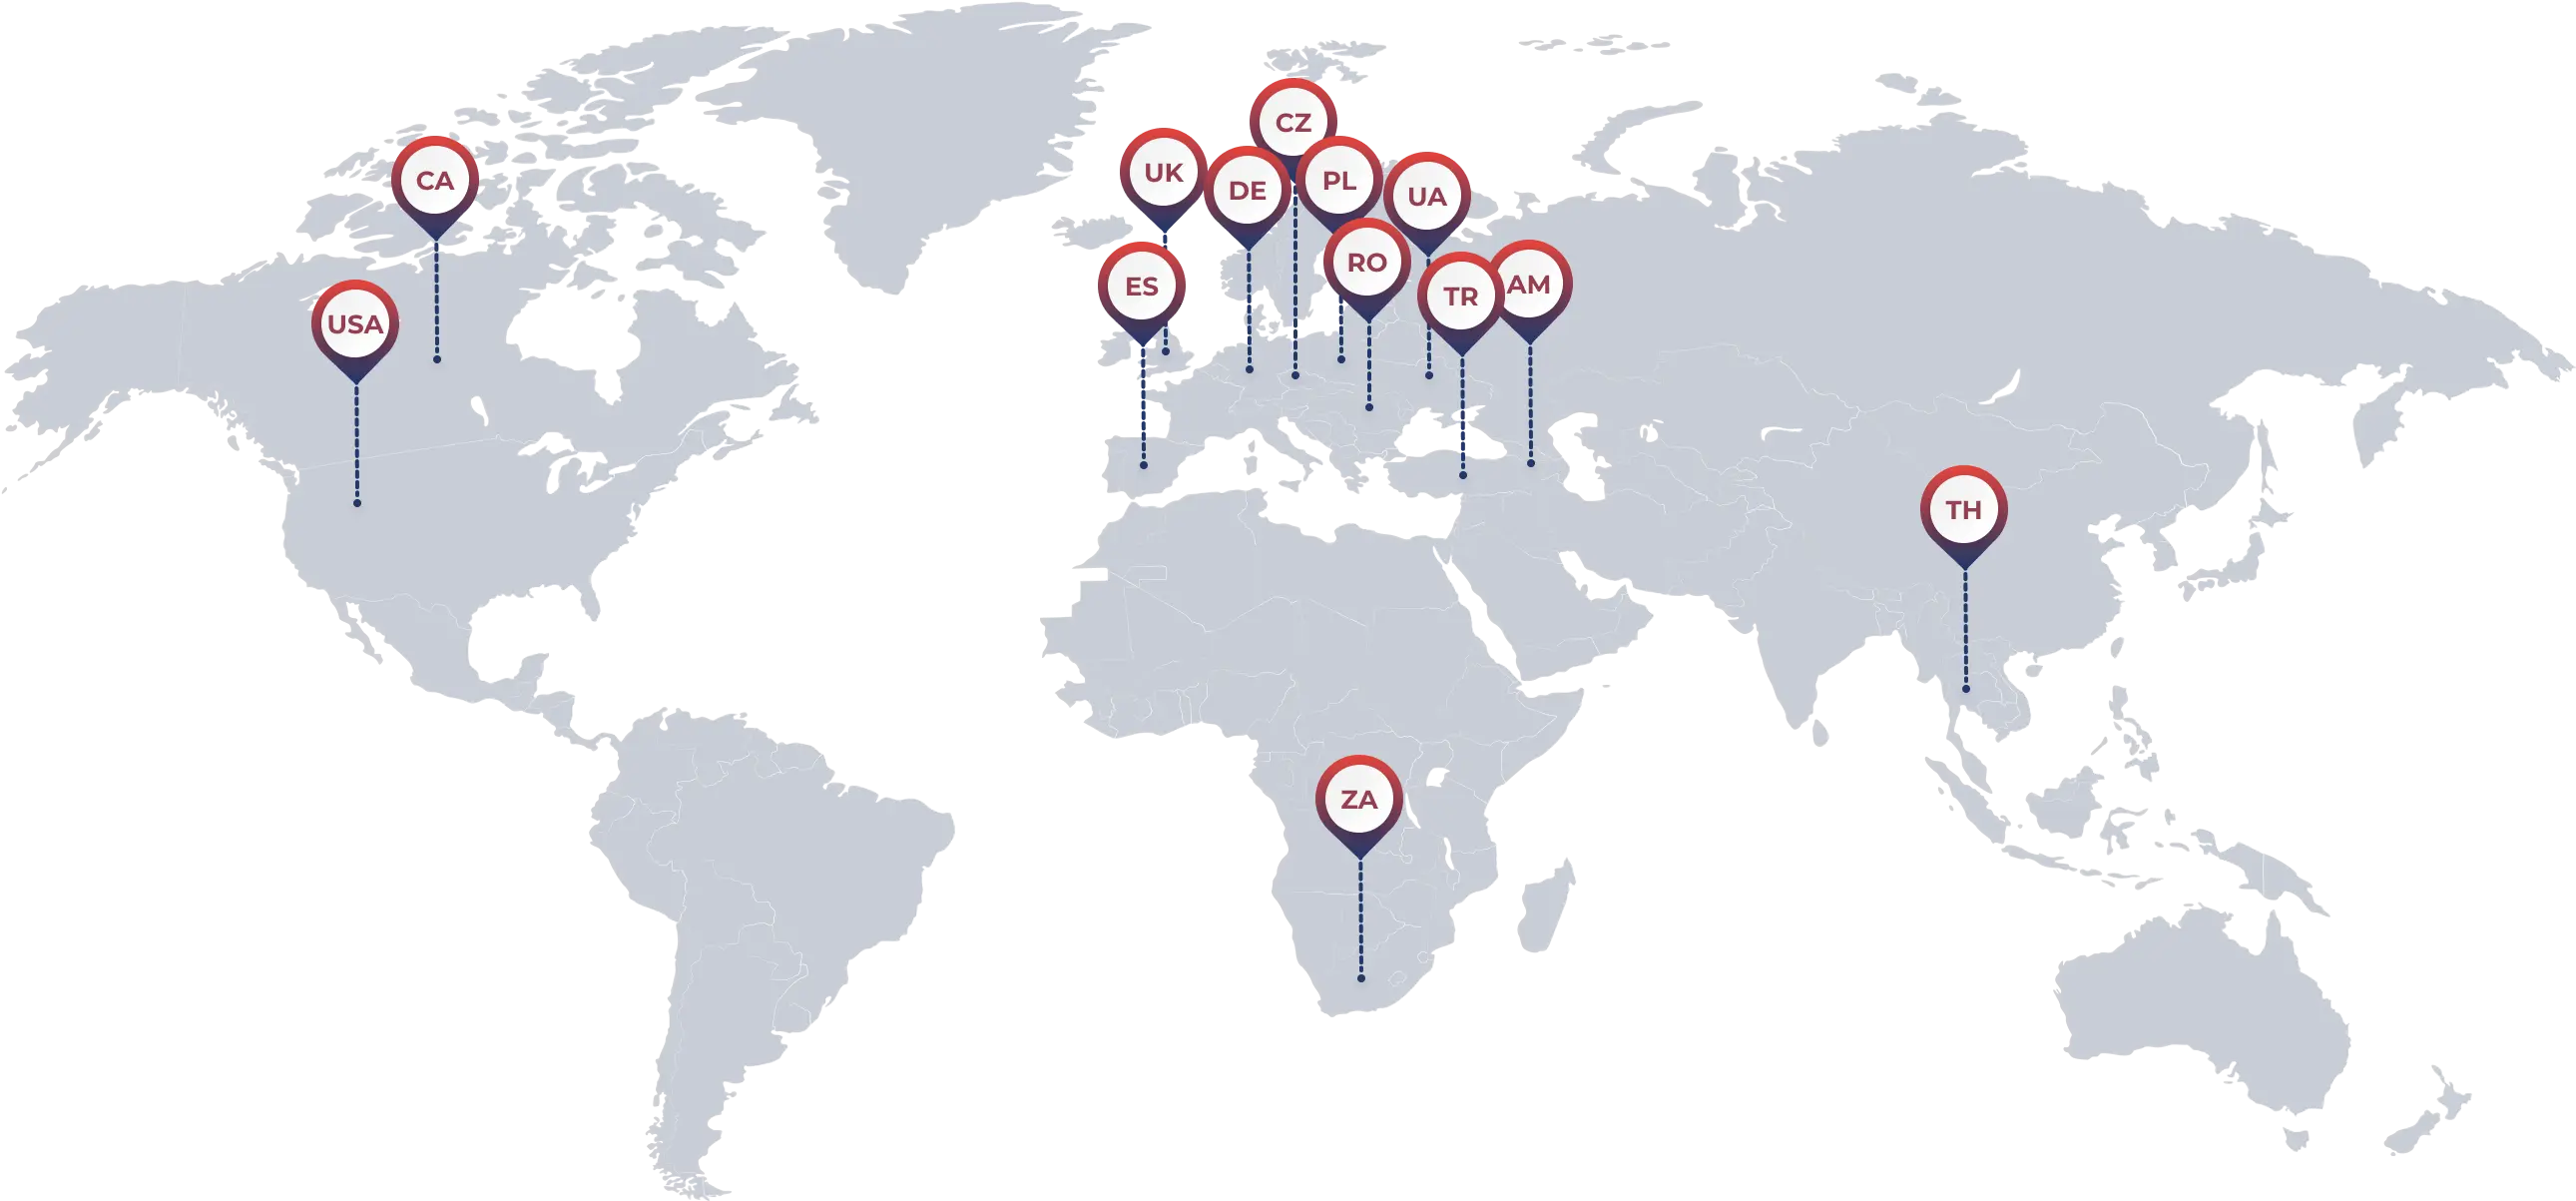 Our team members around the world